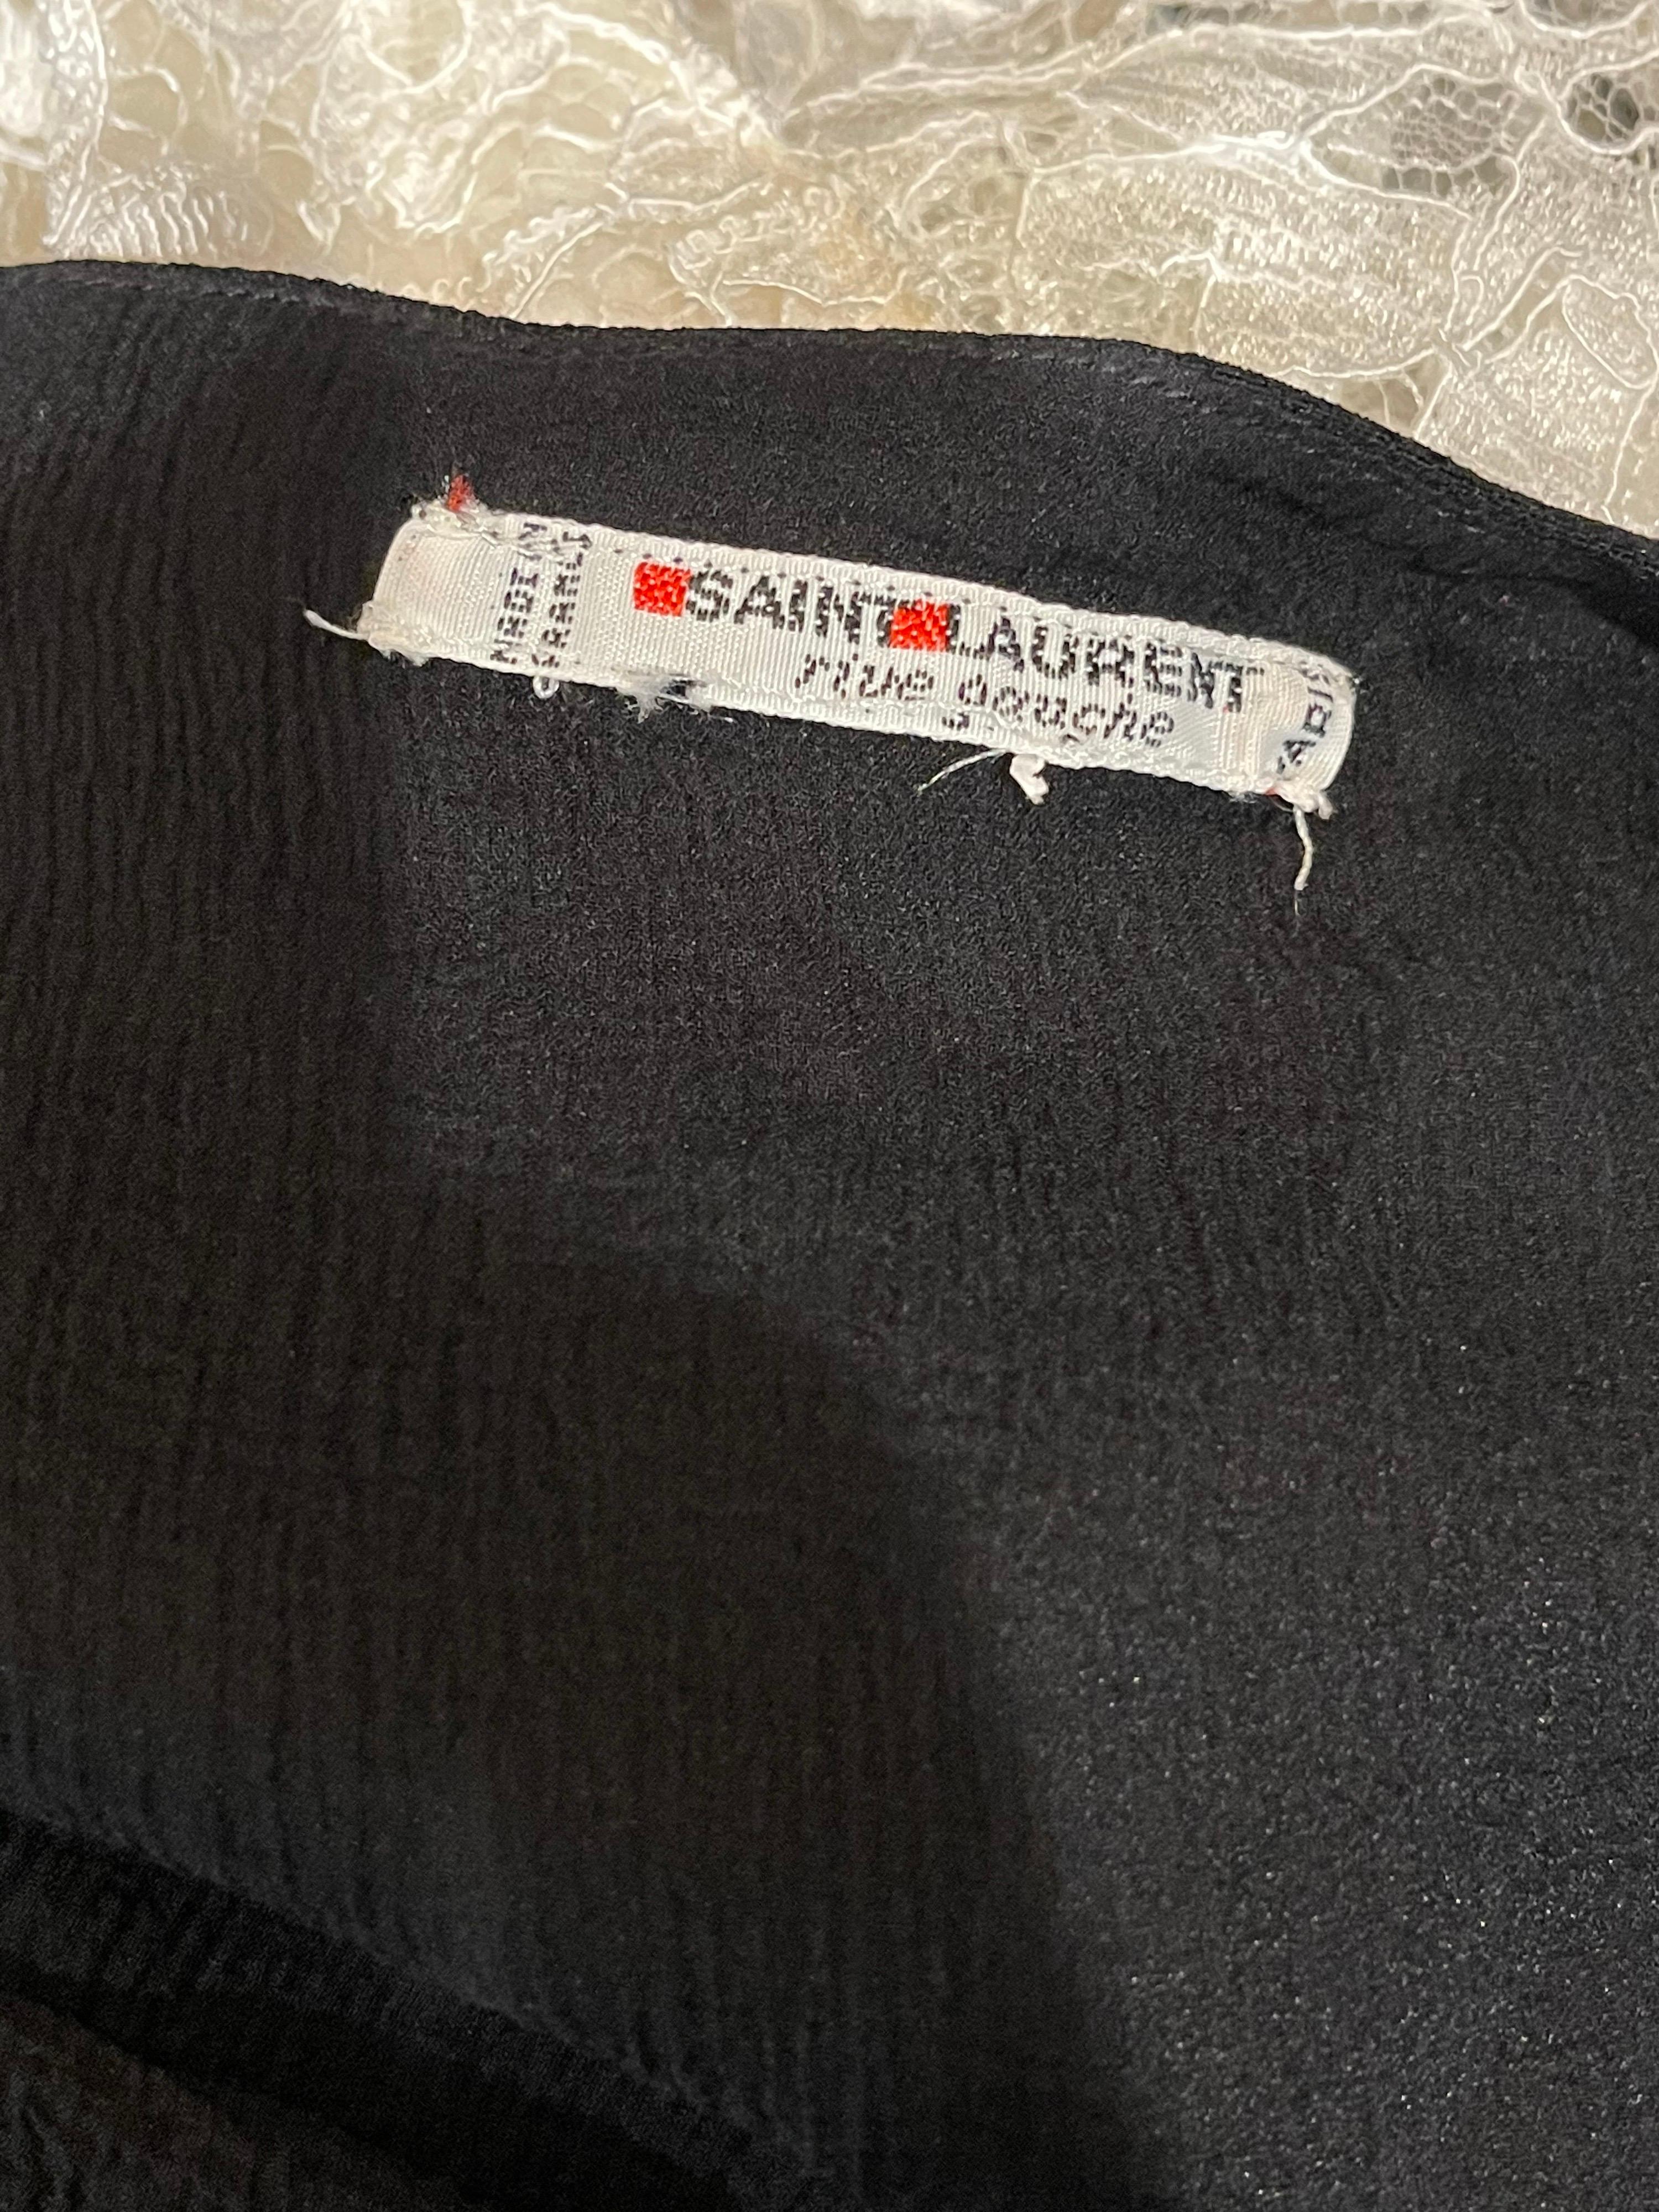 Yves Saint Laurent Rive Gauche 1990s Black Rayon Draped Vintage 90s Top Blouse In Excellent Condition For Sale In San Diego, CA